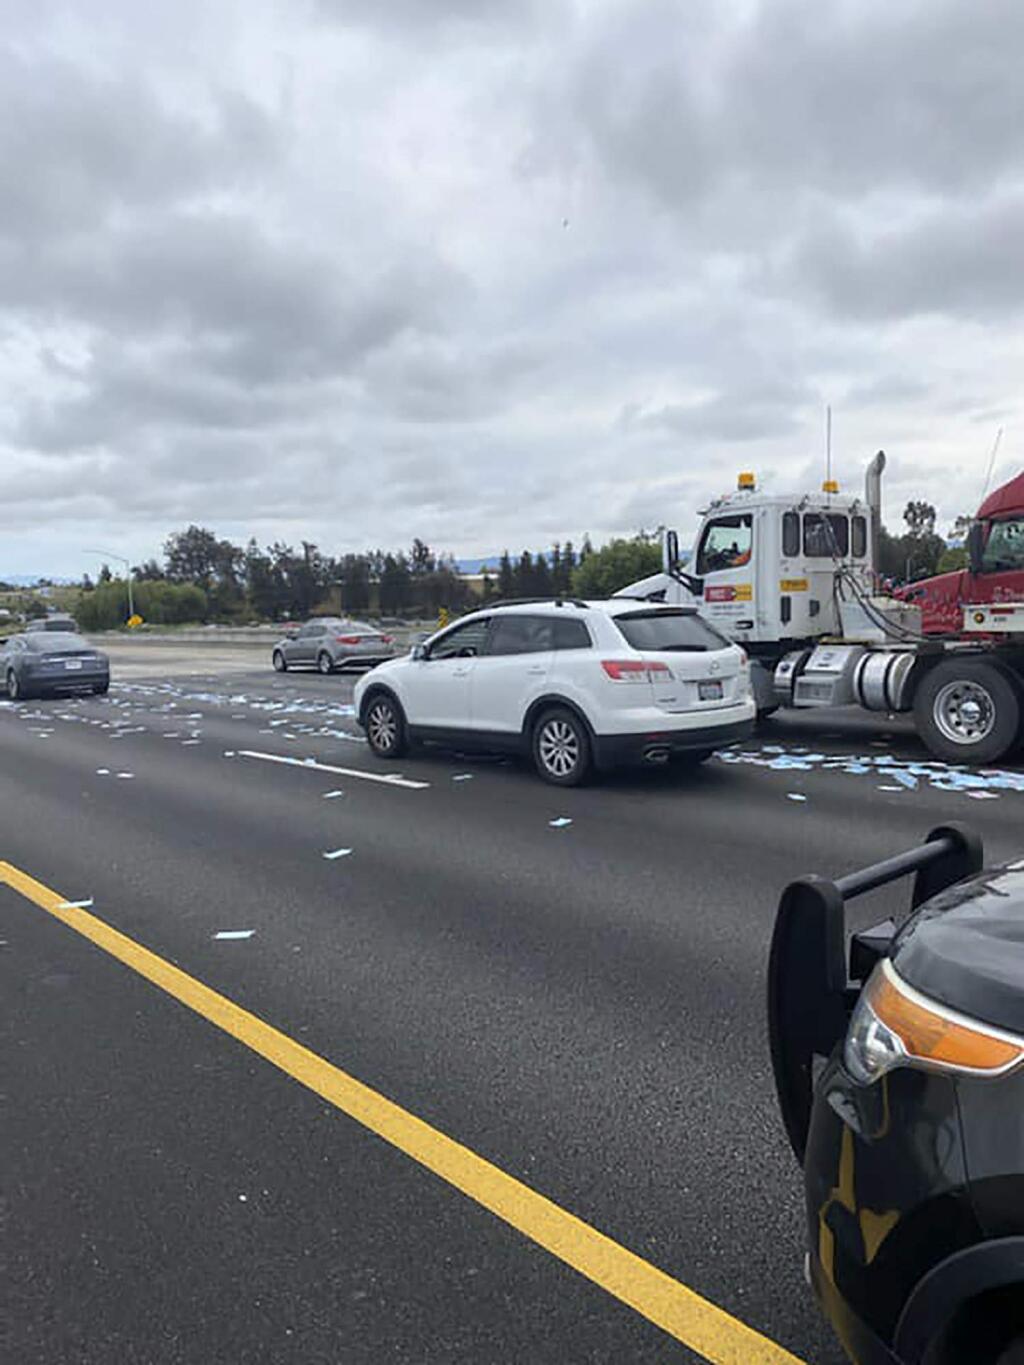 This photo provided by the California Highway Patrol Hayward shows spilled masks on Interstate 880 near Whipple Road in Union City, Calif., on April 29, 2020. The California Highway Patrol says someone who tossed hundreds of medical masks onto the freeway sparked a mini-traffic jam in the San Francisco Bay Area. (Hayward CHP via AP)